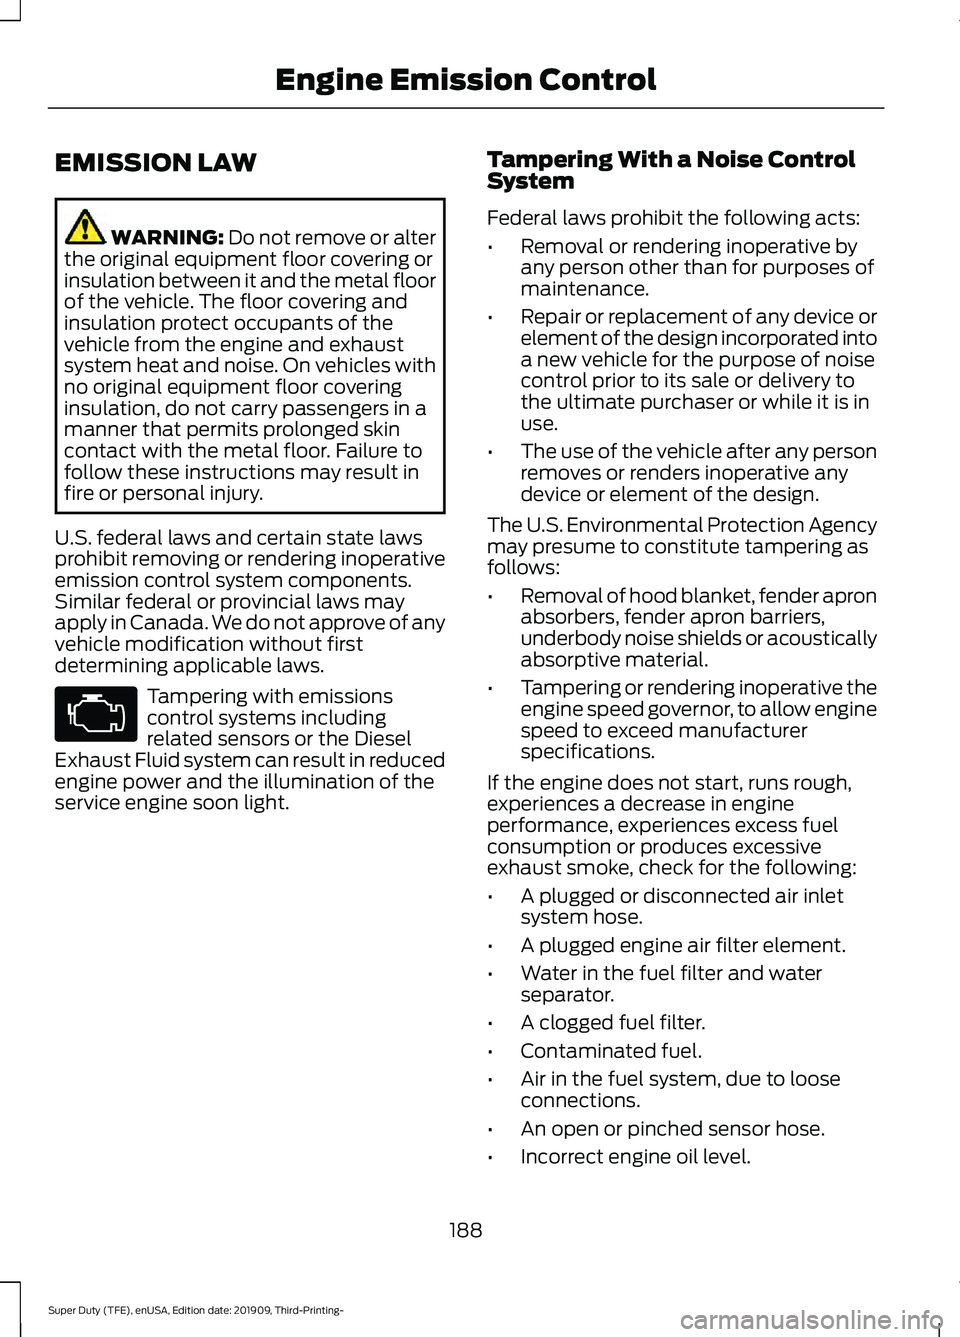 FORD F-550 2020  Owners Manual EMISSION LAW
WARNING: Do not remove or alter
the original equipment floor covering or
insulation between it and the metal floor
of the vehicle. The floor covering and
insulation protect occupants of t